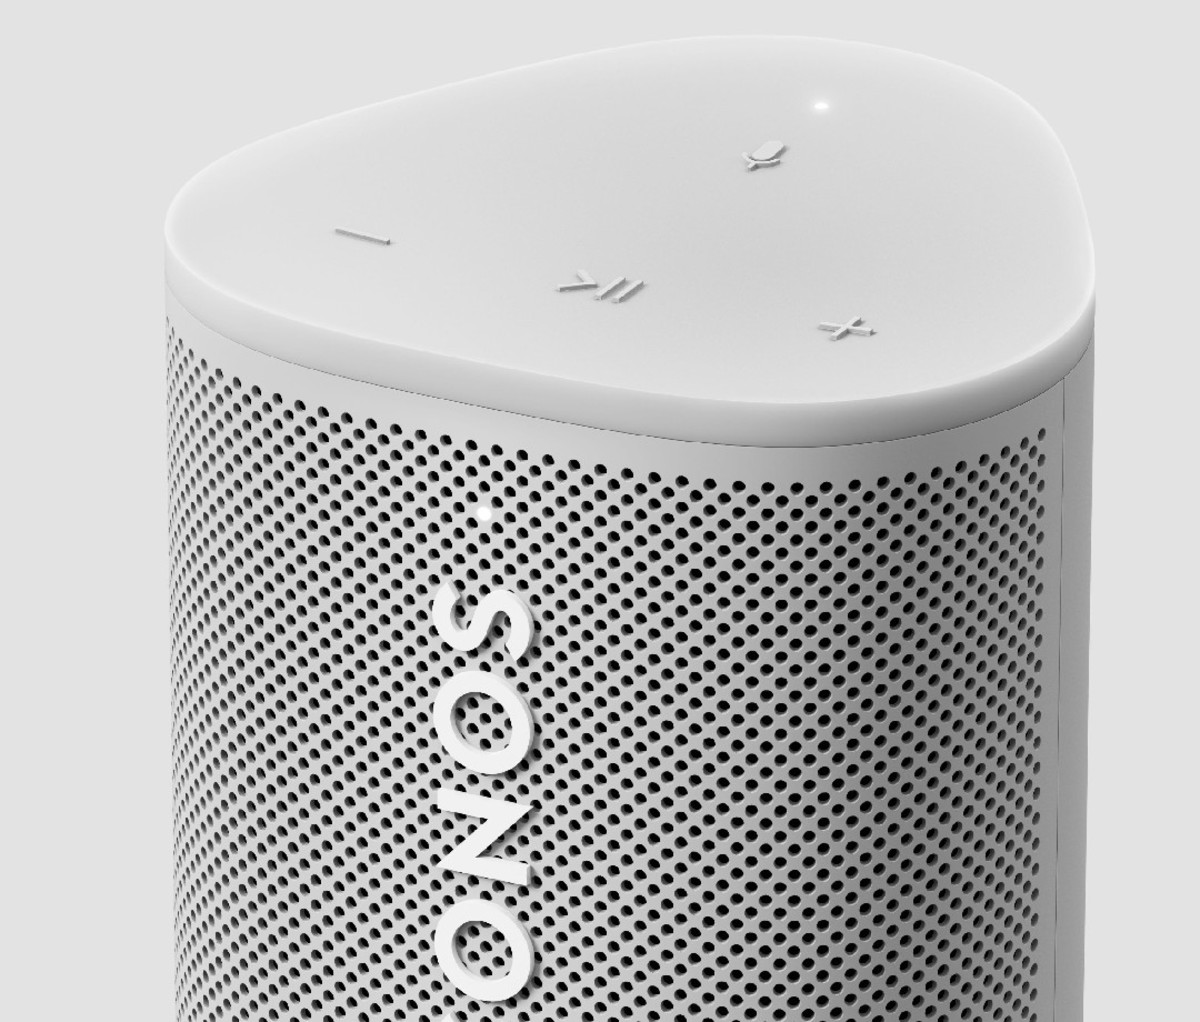 A large image of the Sonos Roam showing the controls on the top.